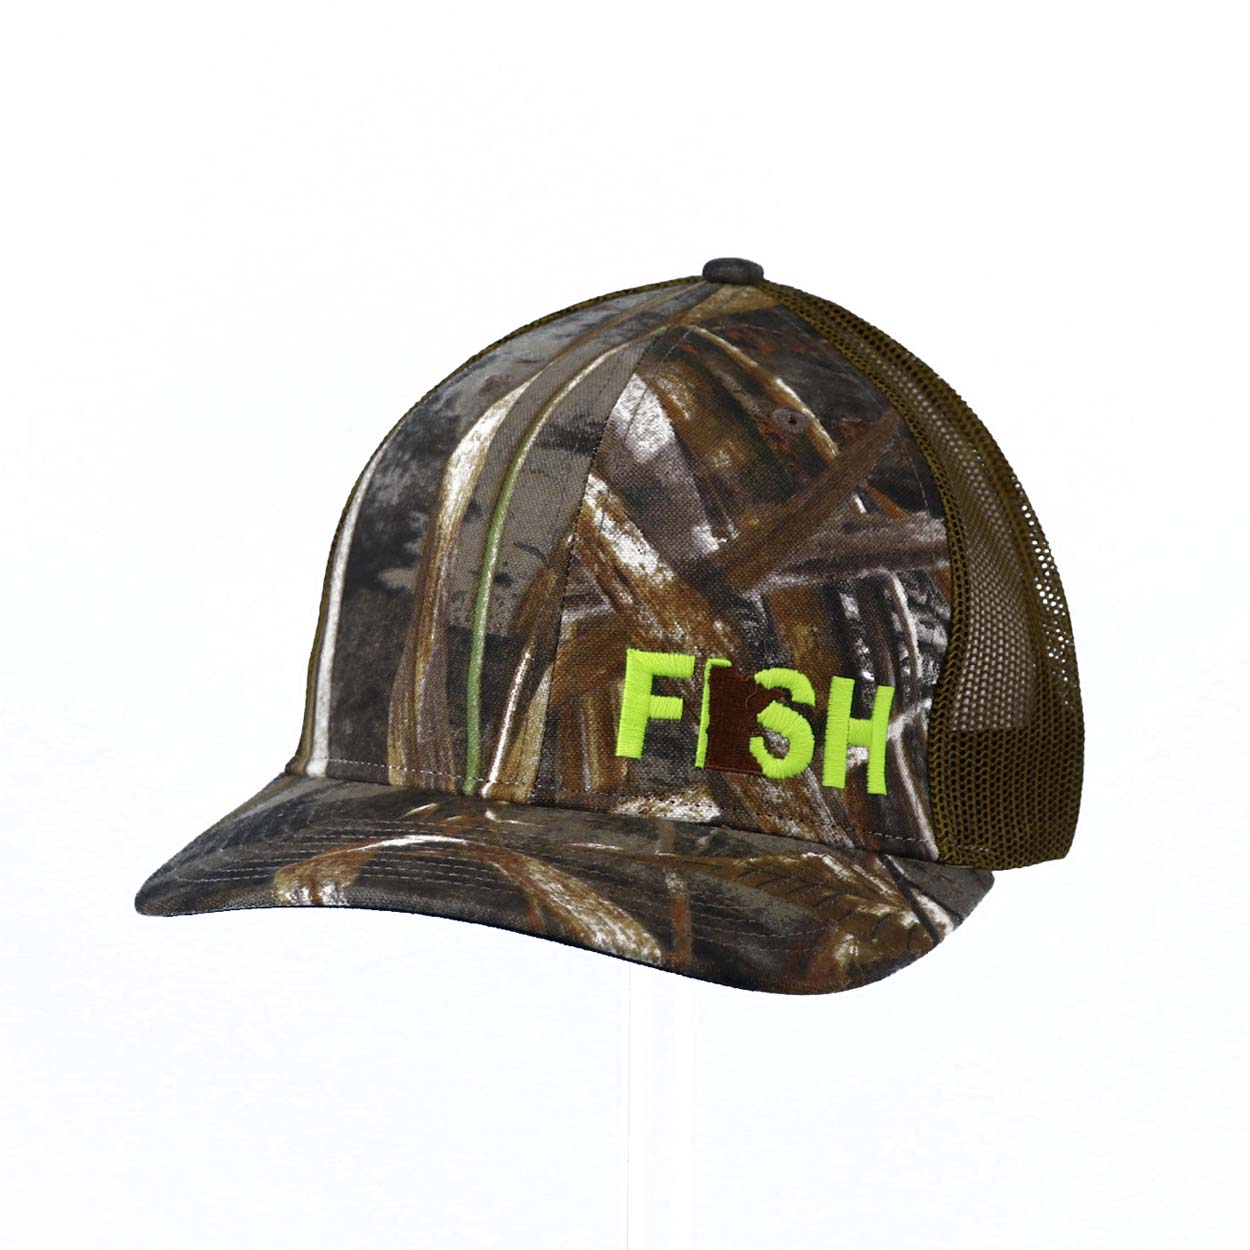 Fish Minnesota Night Out Embroidered Snapback Trucker Hat Realtree Camo Brown/Neon Yellow